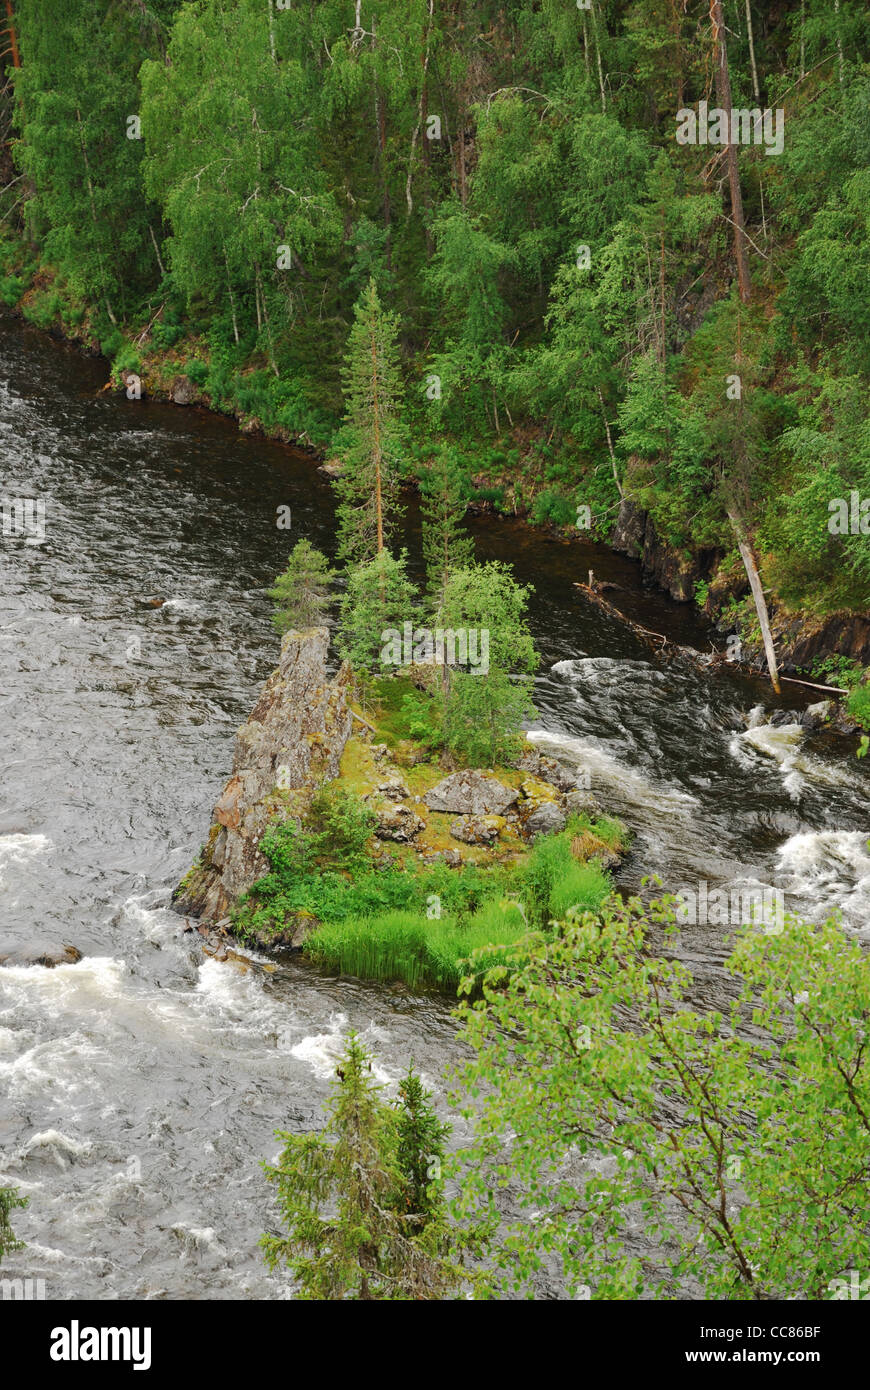 Rapid river with small island in taiga forest, Juuma, Finland Stock Photo